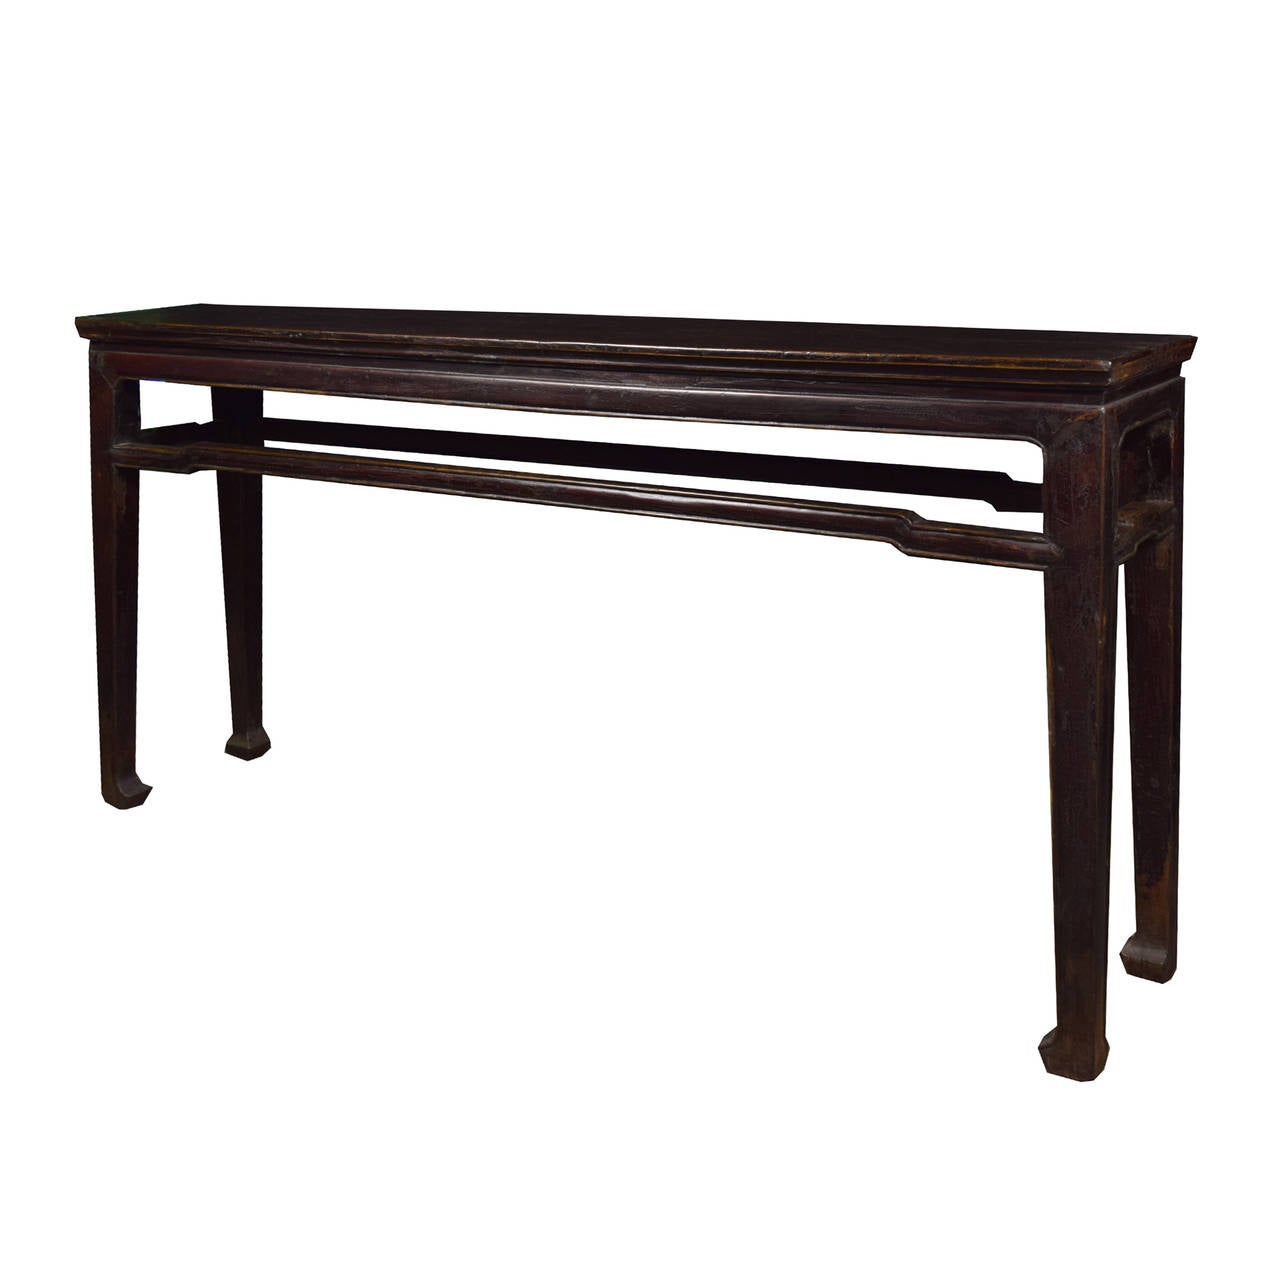 A shallow altar table from Shanxi Province, China made of Chinese Northern elm with stretchers on all four side and legs ending in hoof feet.

